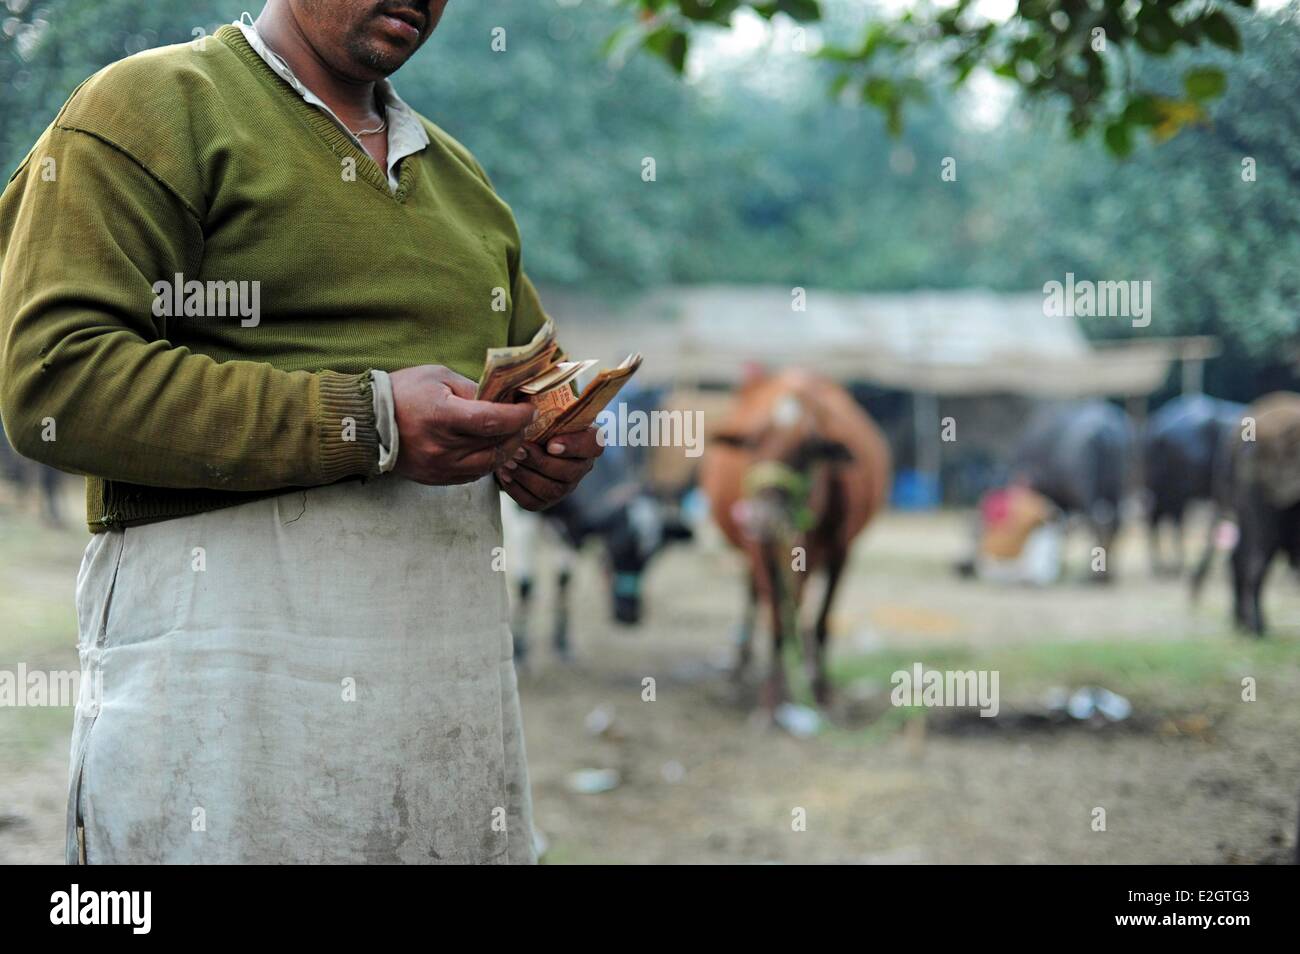 India Bihar state Patna Sonepur Sonepur Mela Cattle Fait (largest in Asia) Indian man counting money after selling ox Stock Photo